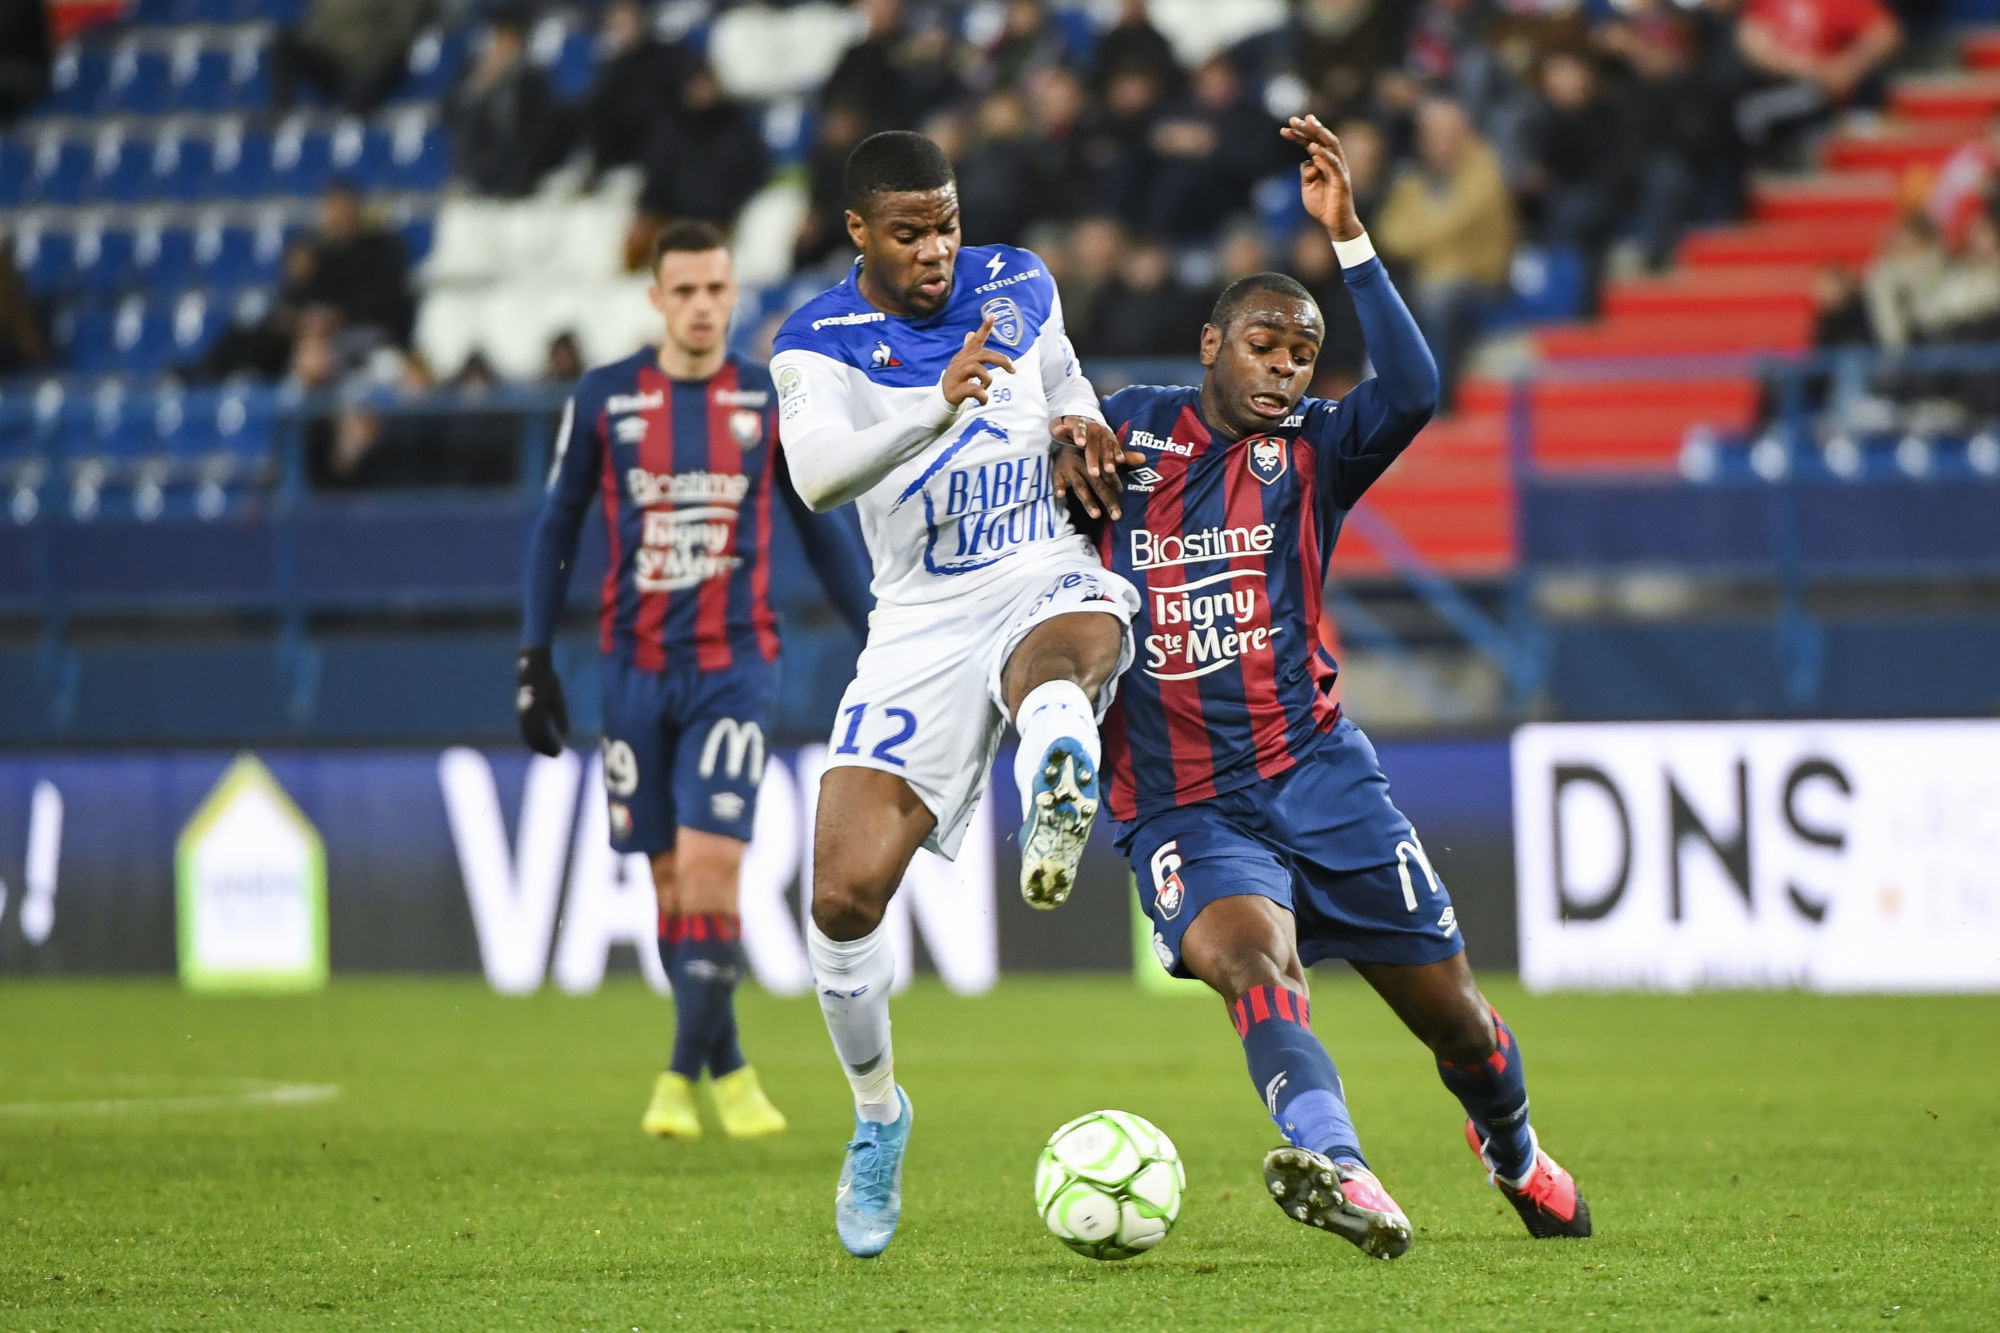 Warren TCHIMBEMBE of Troyes and Prince ONIANGUE of Caen during the Ligue 2 match between Caen and Troyes at Stade Michel D'Ornano on February 14, 2020 in Caen, France. (Photo by Aude Alcover/Icon Sport) - Stade Michel d'Ornano - Caen (France)